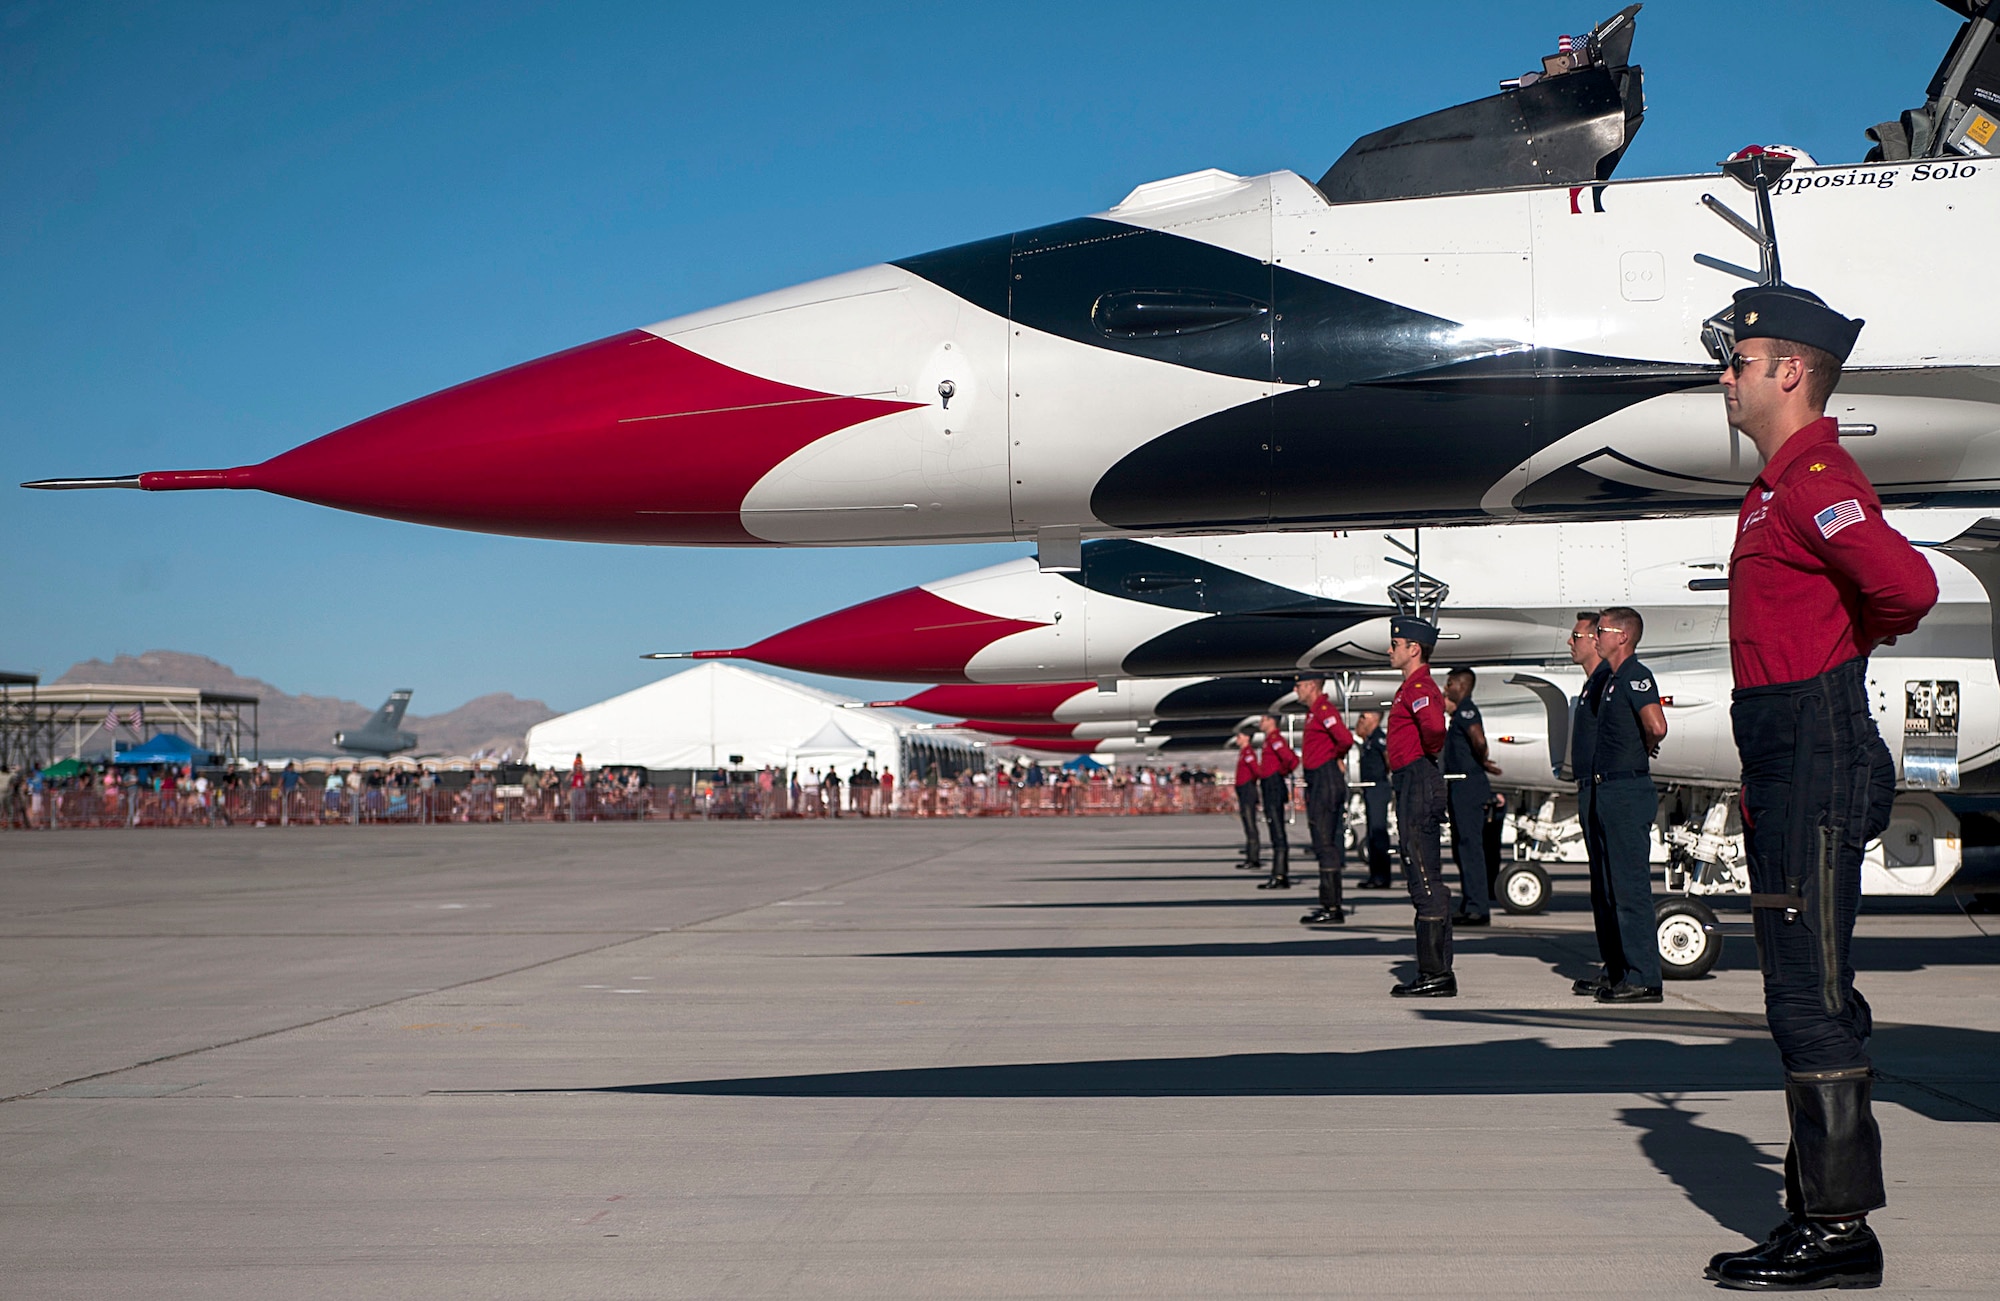 U.S. Air Force Thunderbird Air Demonstration Squadron pilots prepare for take-off during the Aviation Nation air show on Nellis Air Force Base, Nev., Nov. 11, 2016. More than 295,000 global spectators to the Las Vegas area for the two-day event. (U.S. Air Force photo by Airman 1st Class Kevin Tanenbaum/Released)